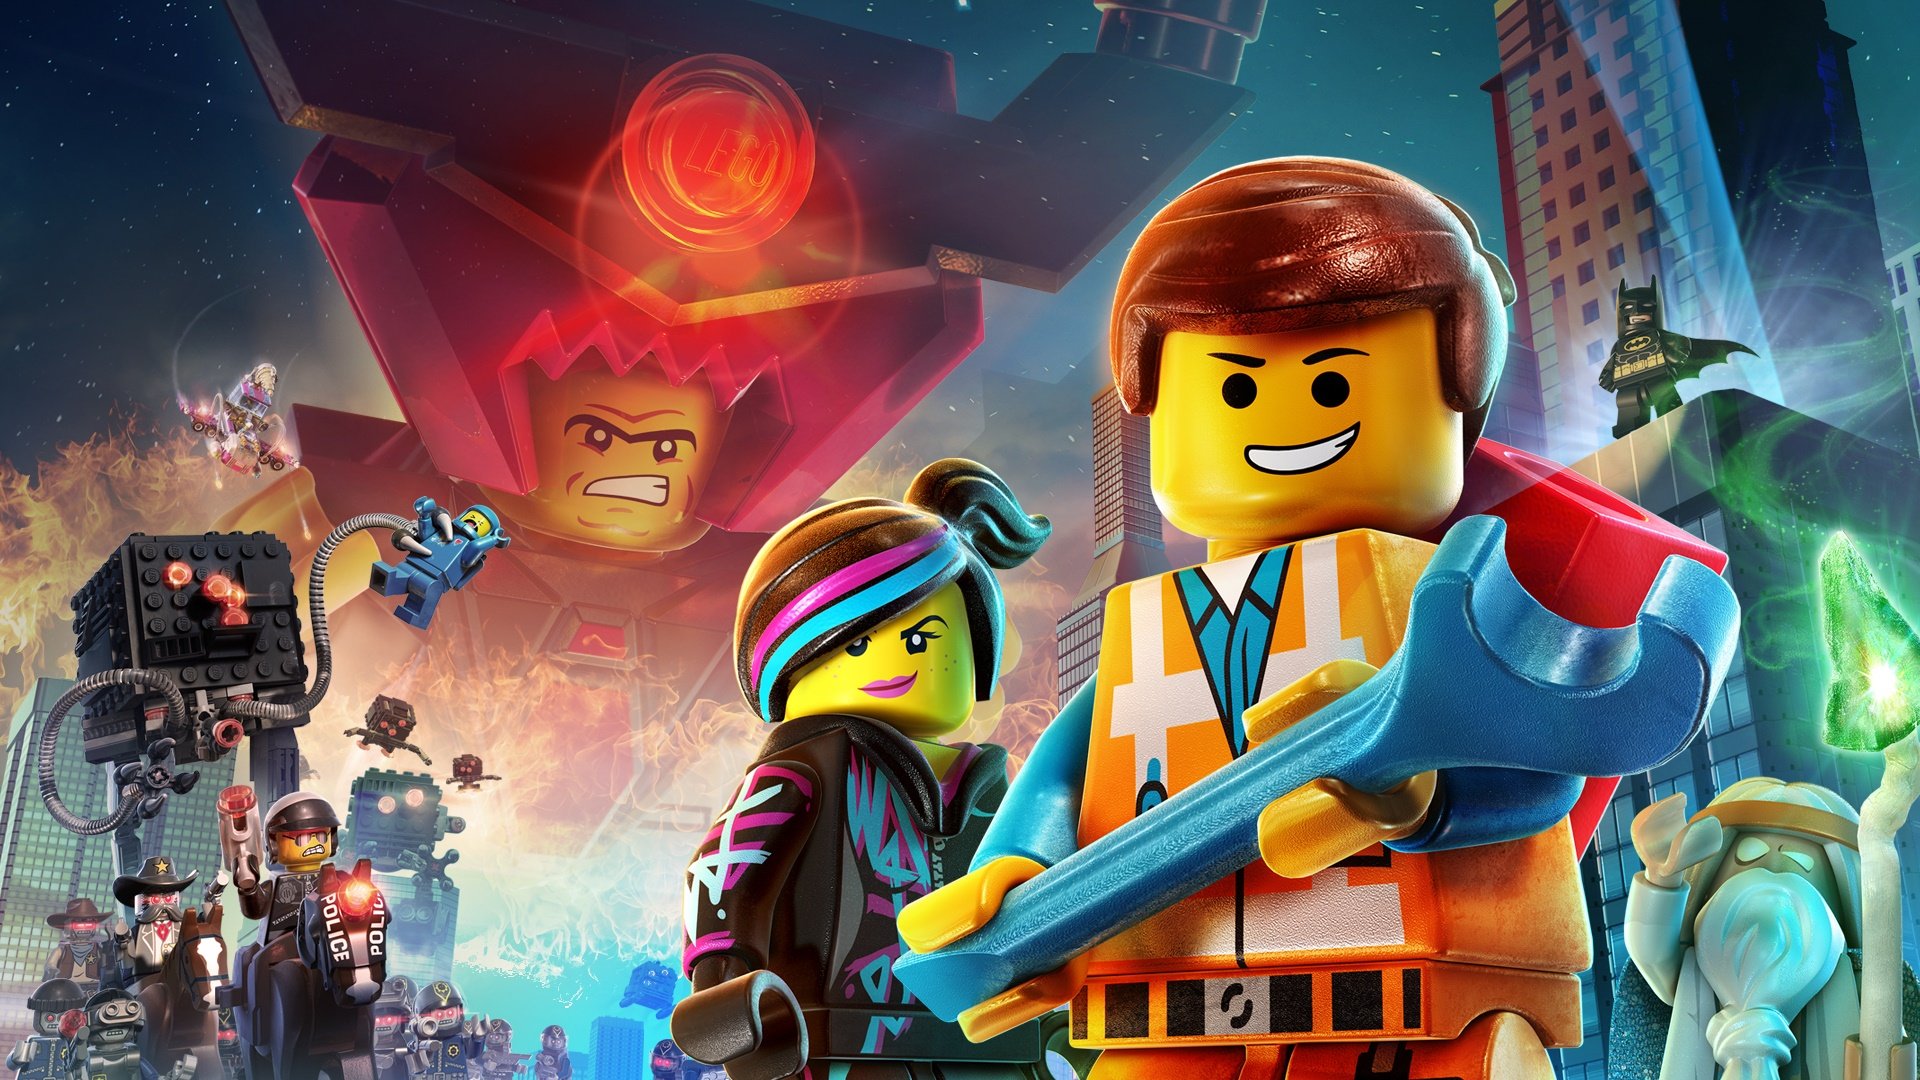 The Lego Movie 2014 Movie Wallpapers HD Wallpapers 1920x1080